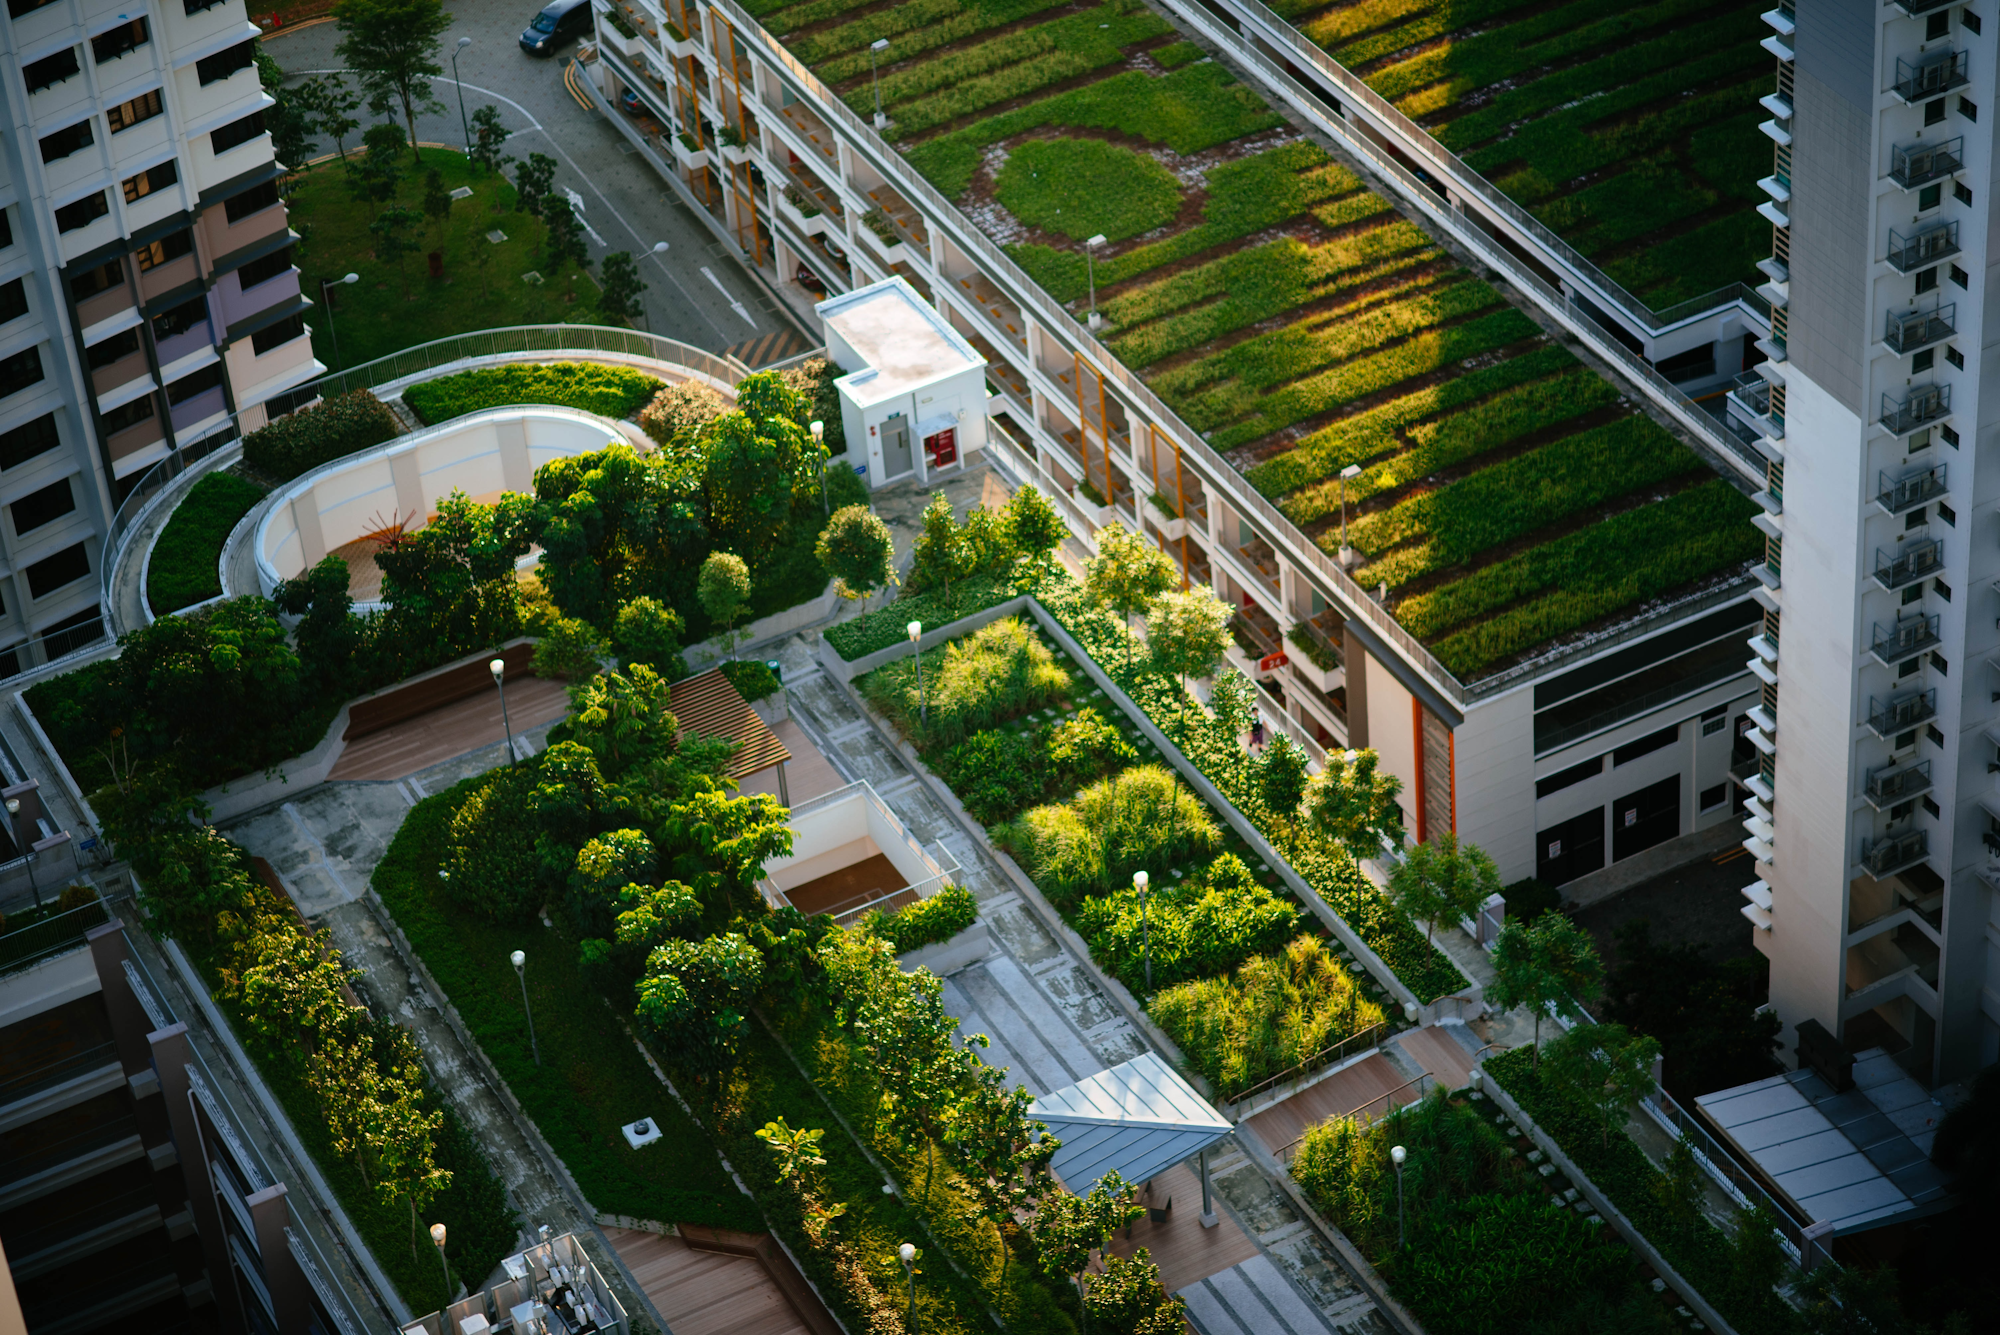 a roof top garden green roof from above in the city